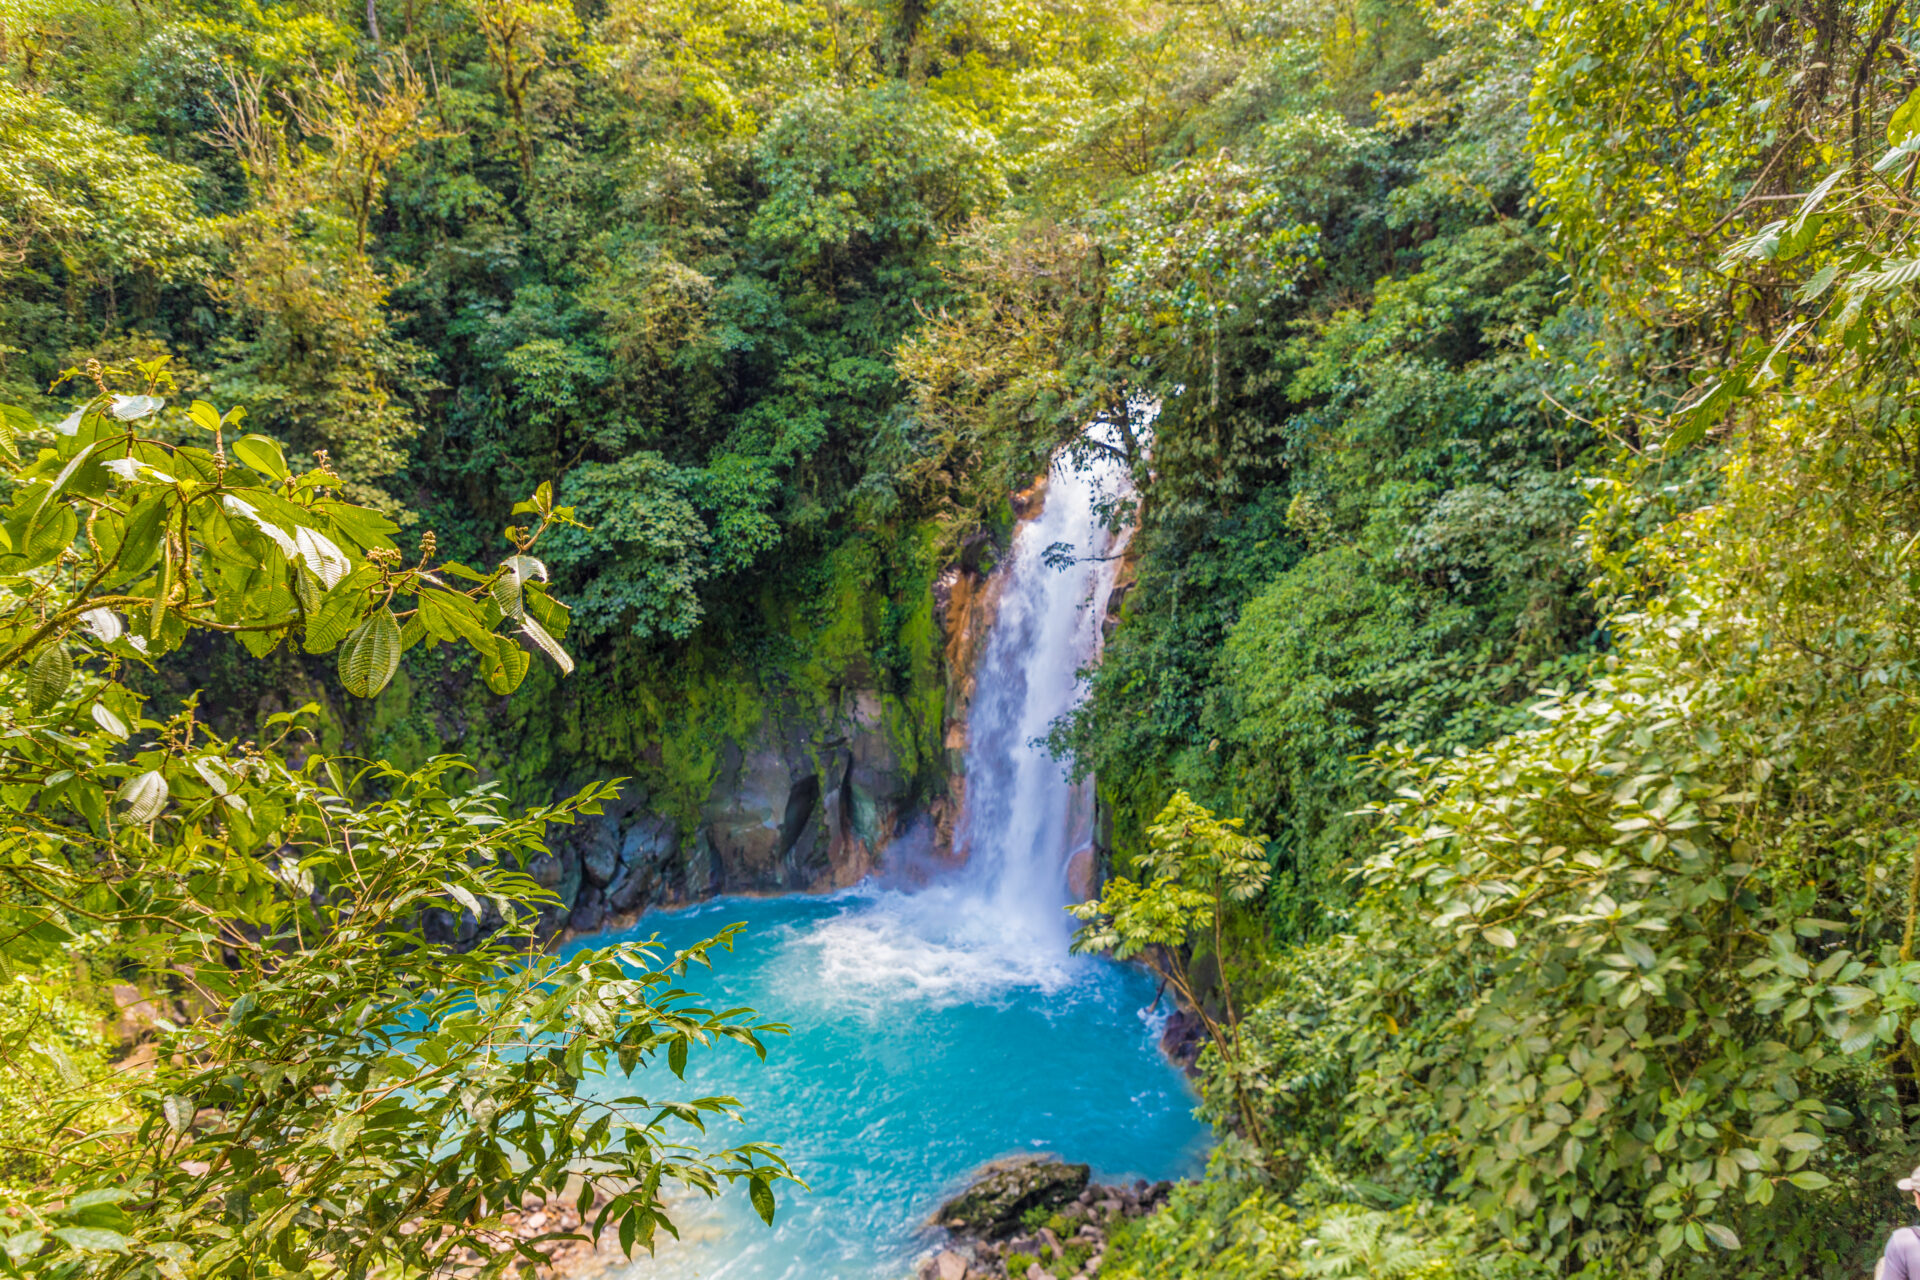 Tips for Visiting the Rio Celeste Waterfall in Costa Rica